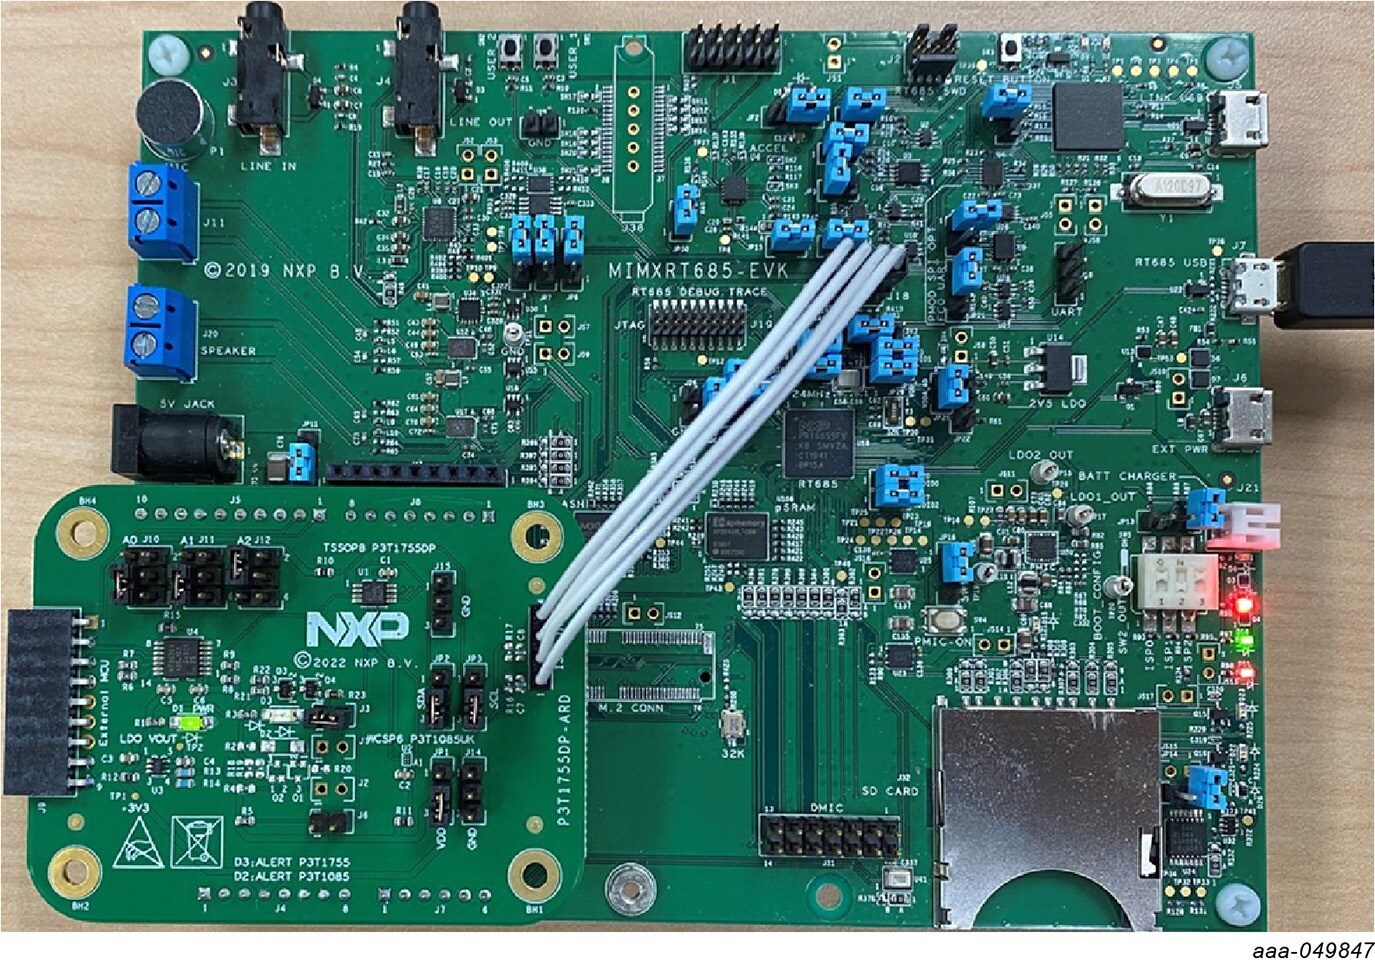 P3T1755DP-ARD evaluation board connecting to the MIMXRT685-EVK MCU board